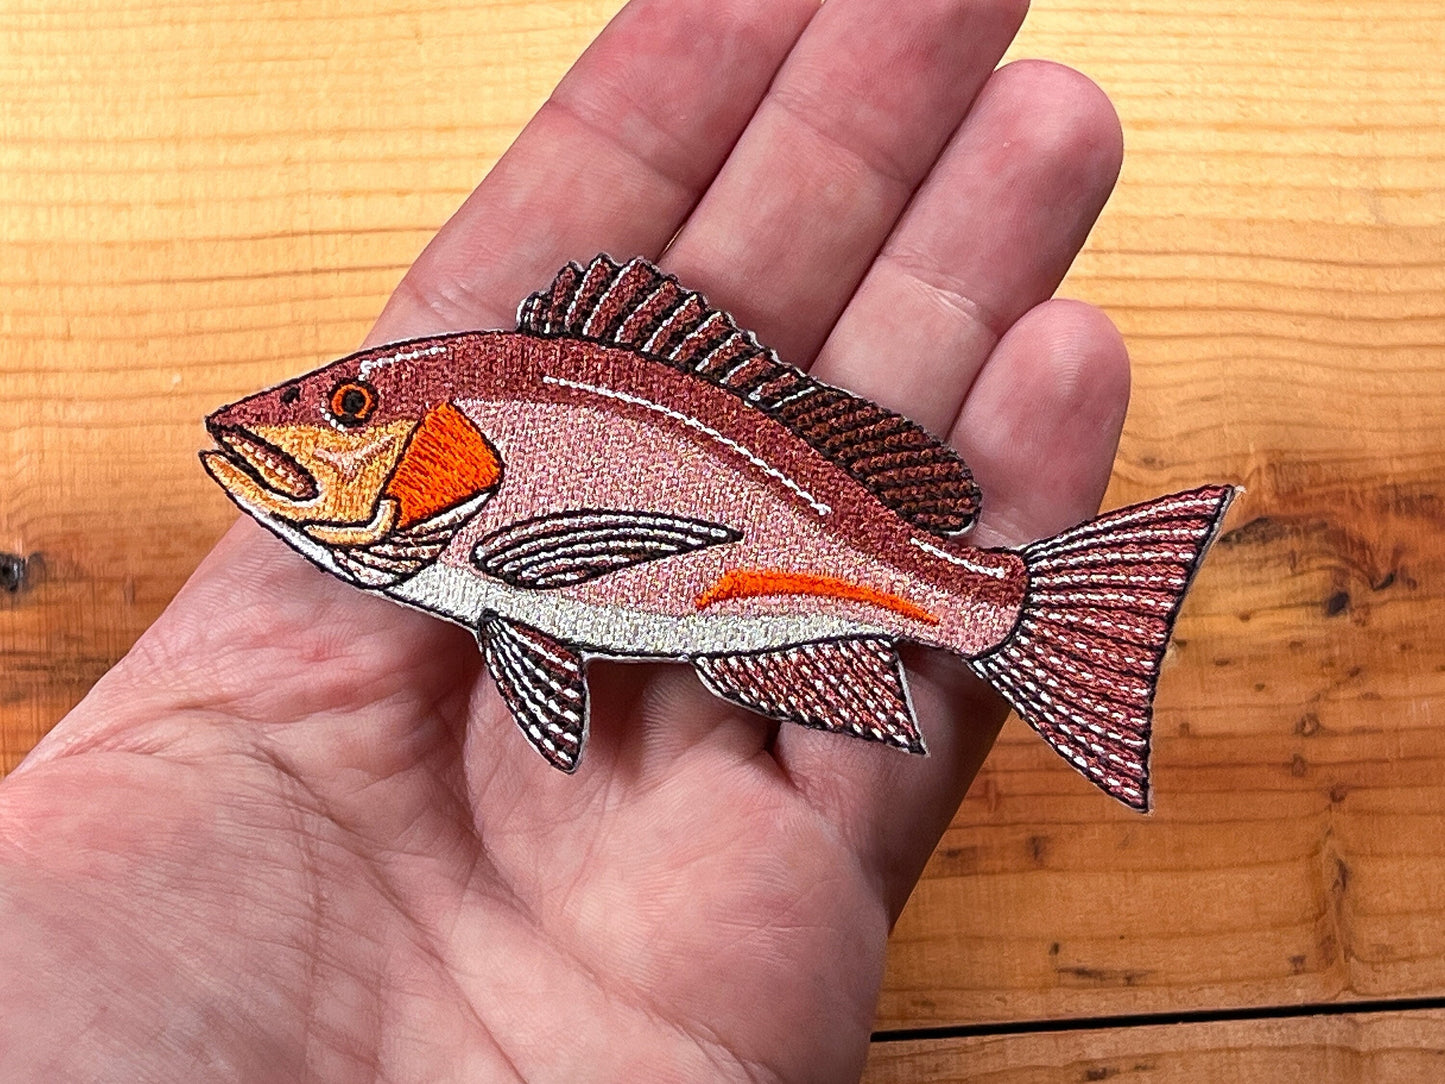 Red Snapper-Patch